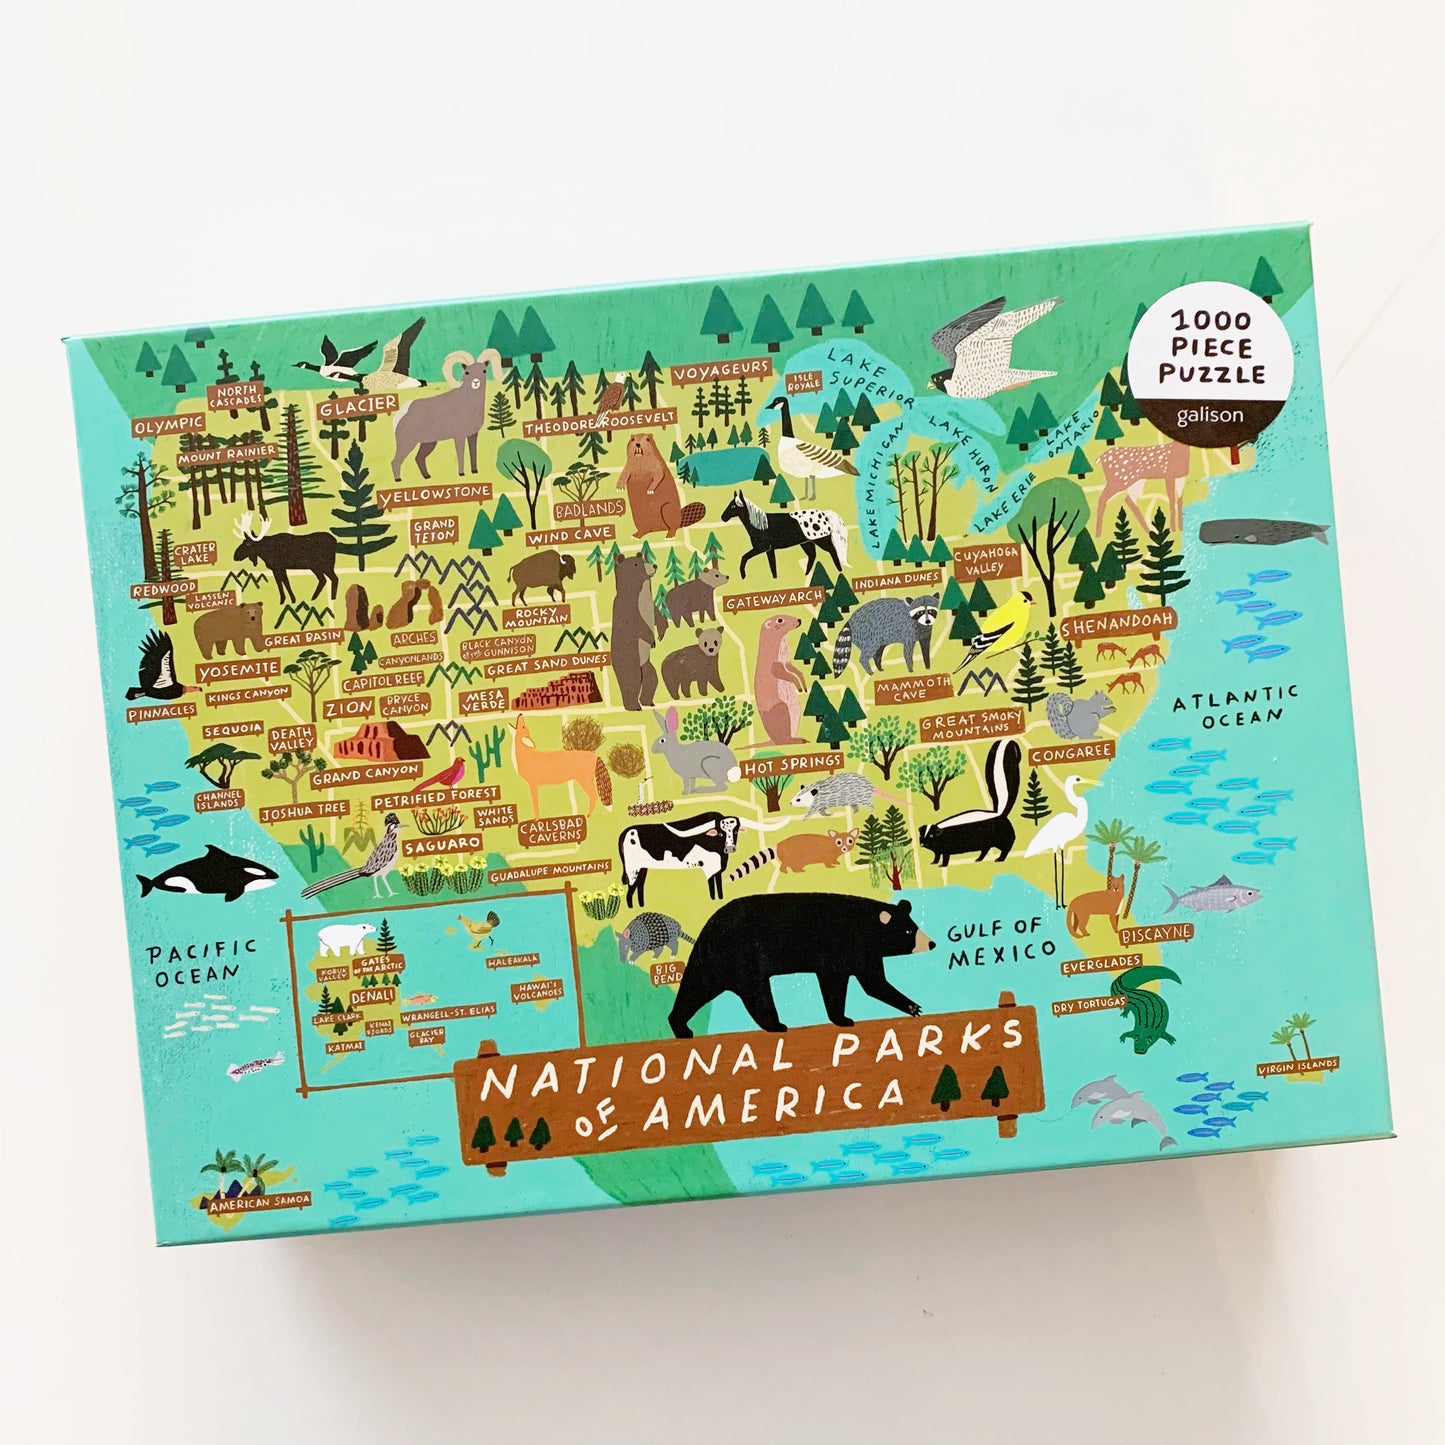 National Parks of America Puzzle